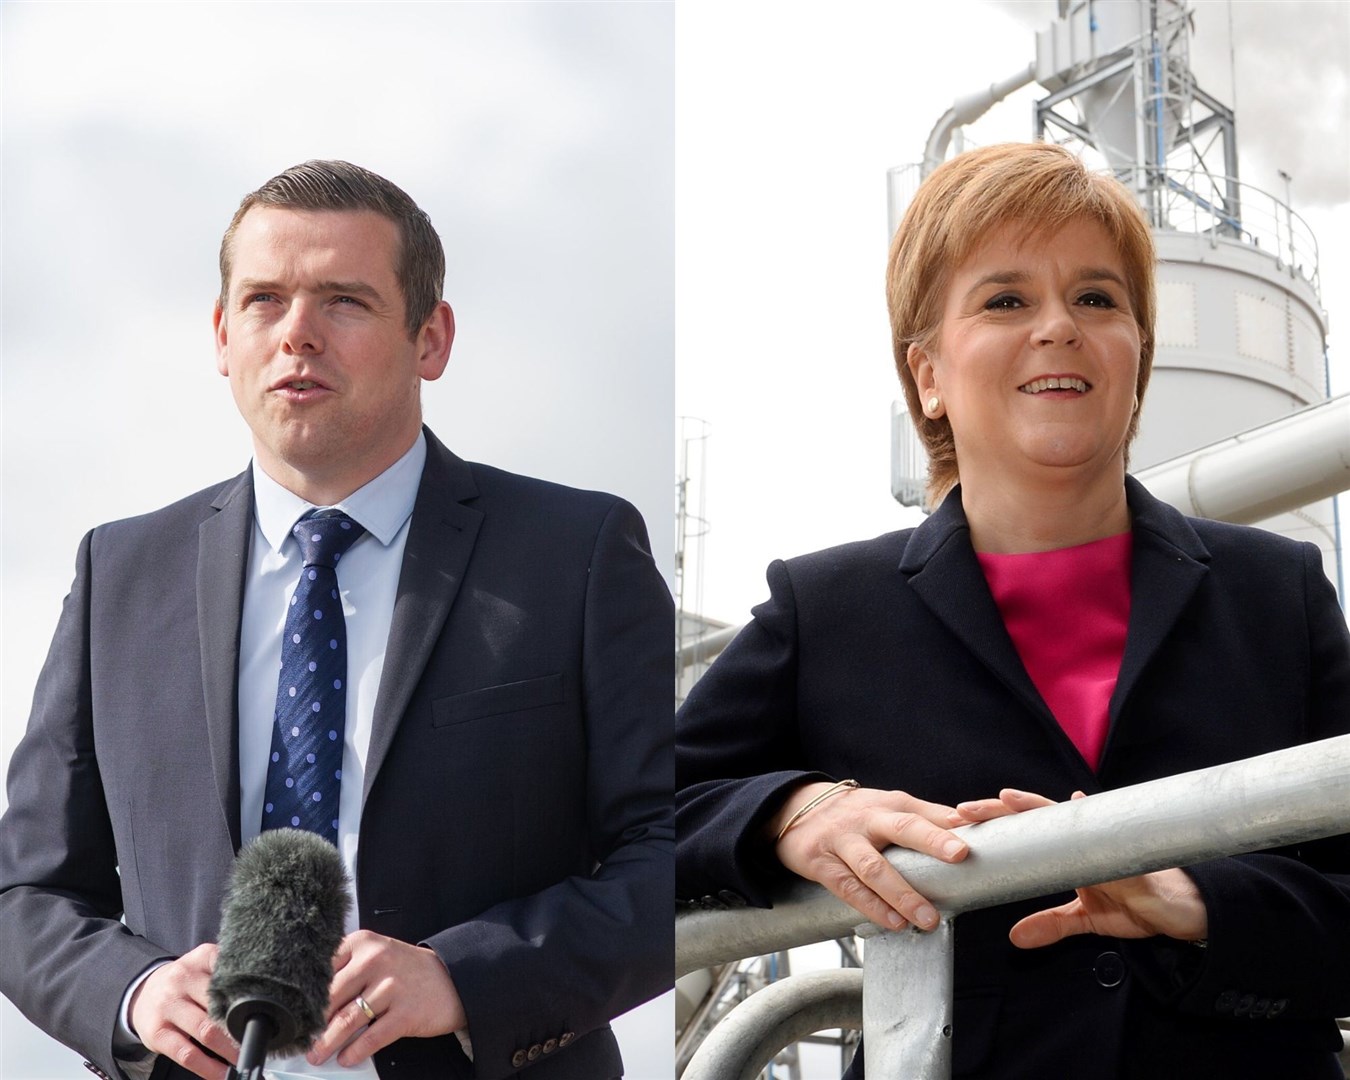 Douglas Ross on Nicola Sturgeon: she has presided over a decade of divisions and decay.